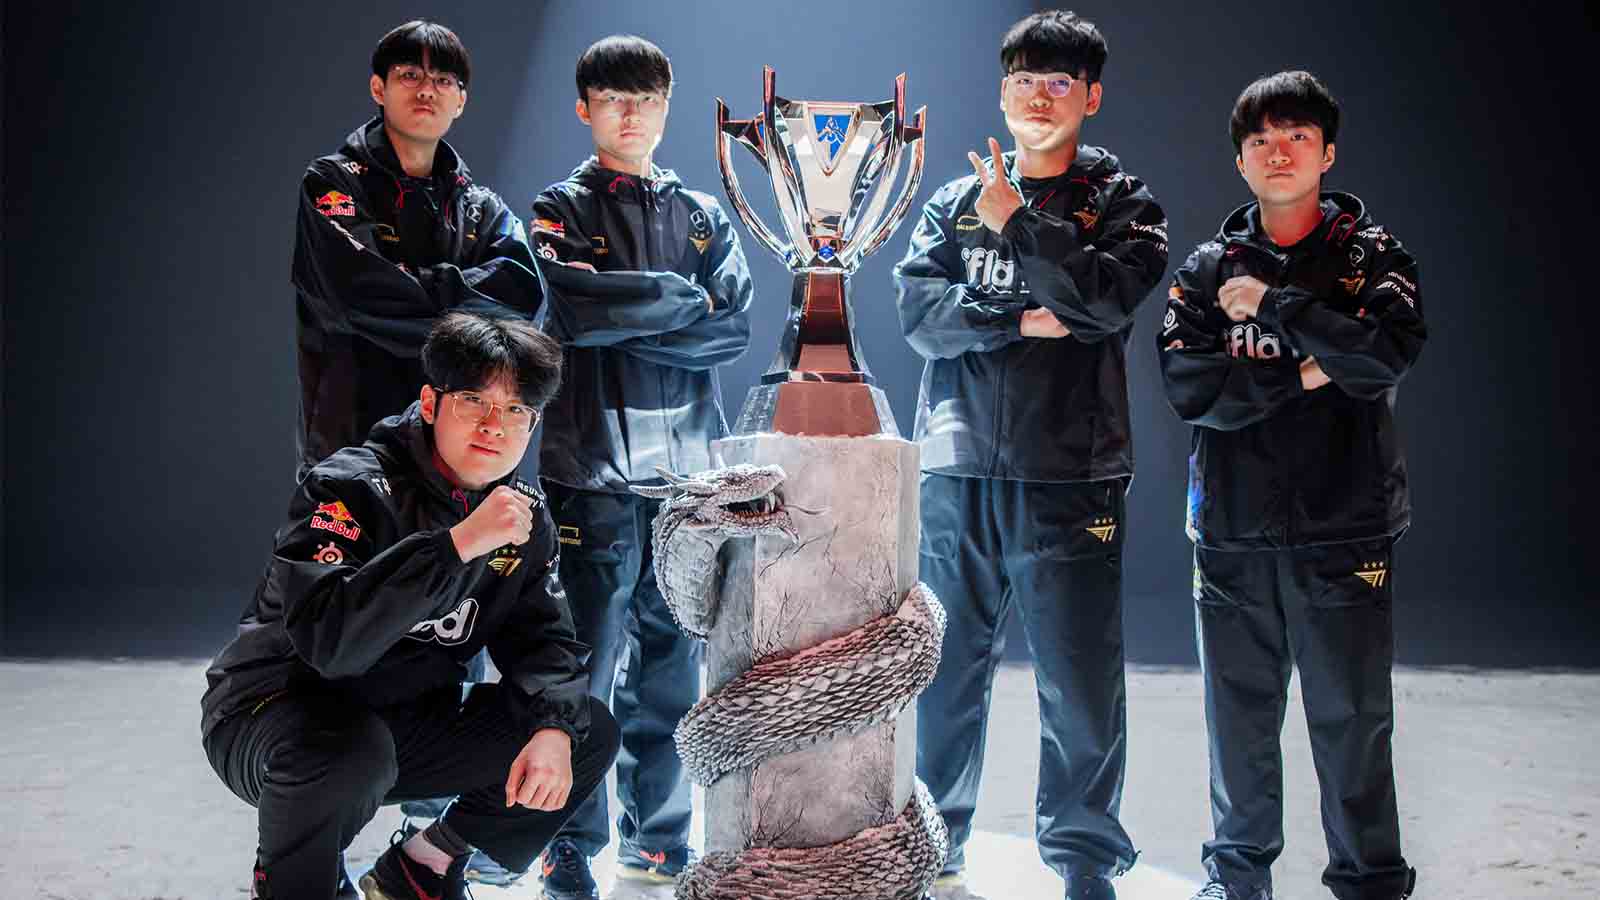 T1 embody Heartsteel song to become Worlds 2023 champions